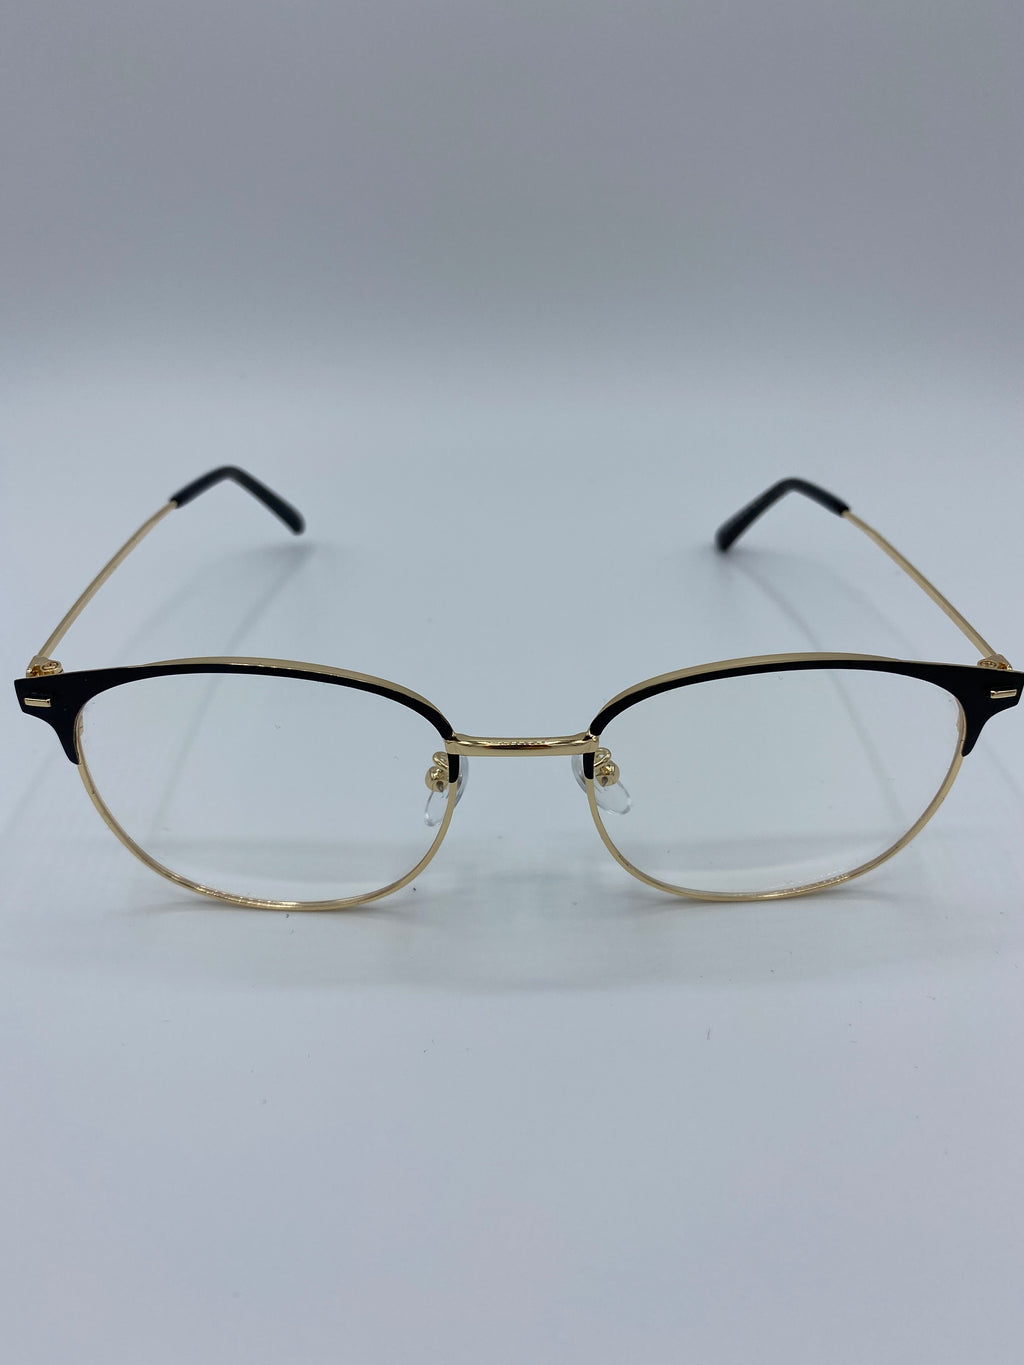 *NEW VERSION* Club Masters Clear Lens